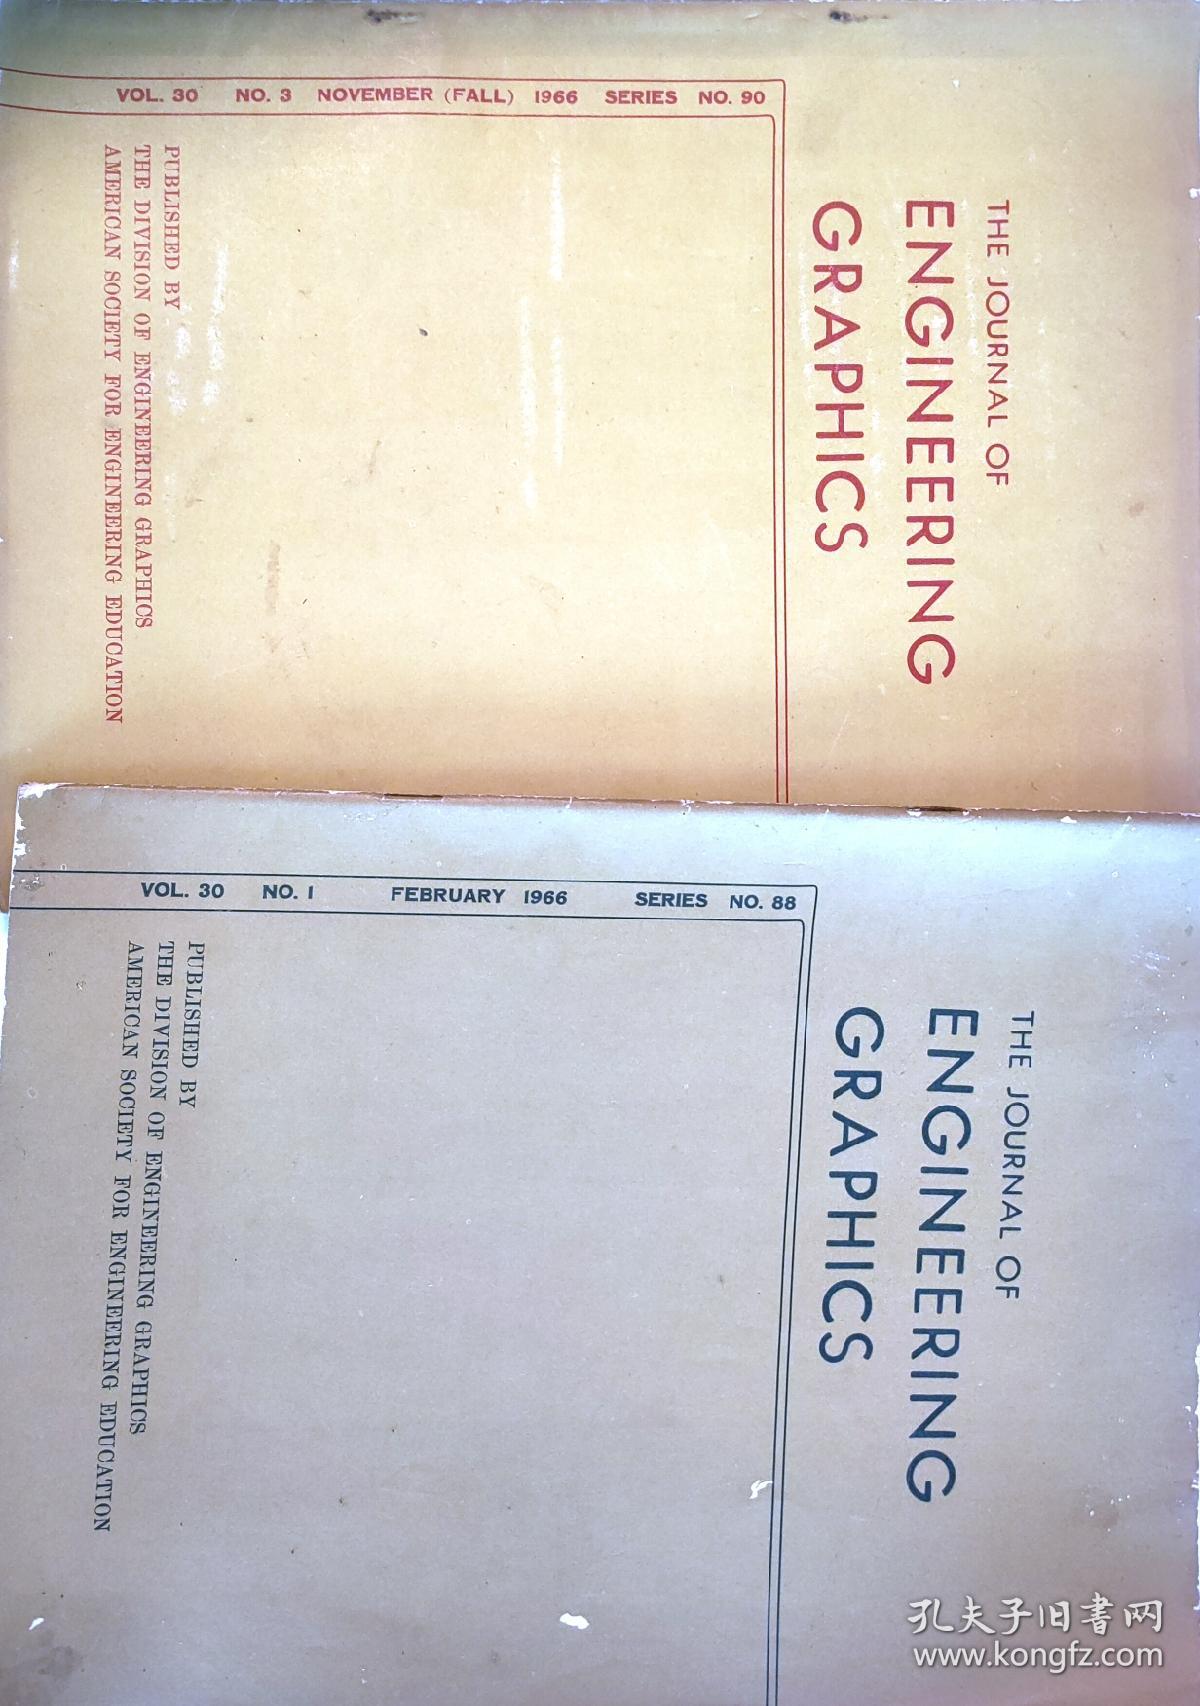 The journal of engineering graphics
1966年 No 88/90 Vol 30 No1/ 2 佳兆业北2428 1-3